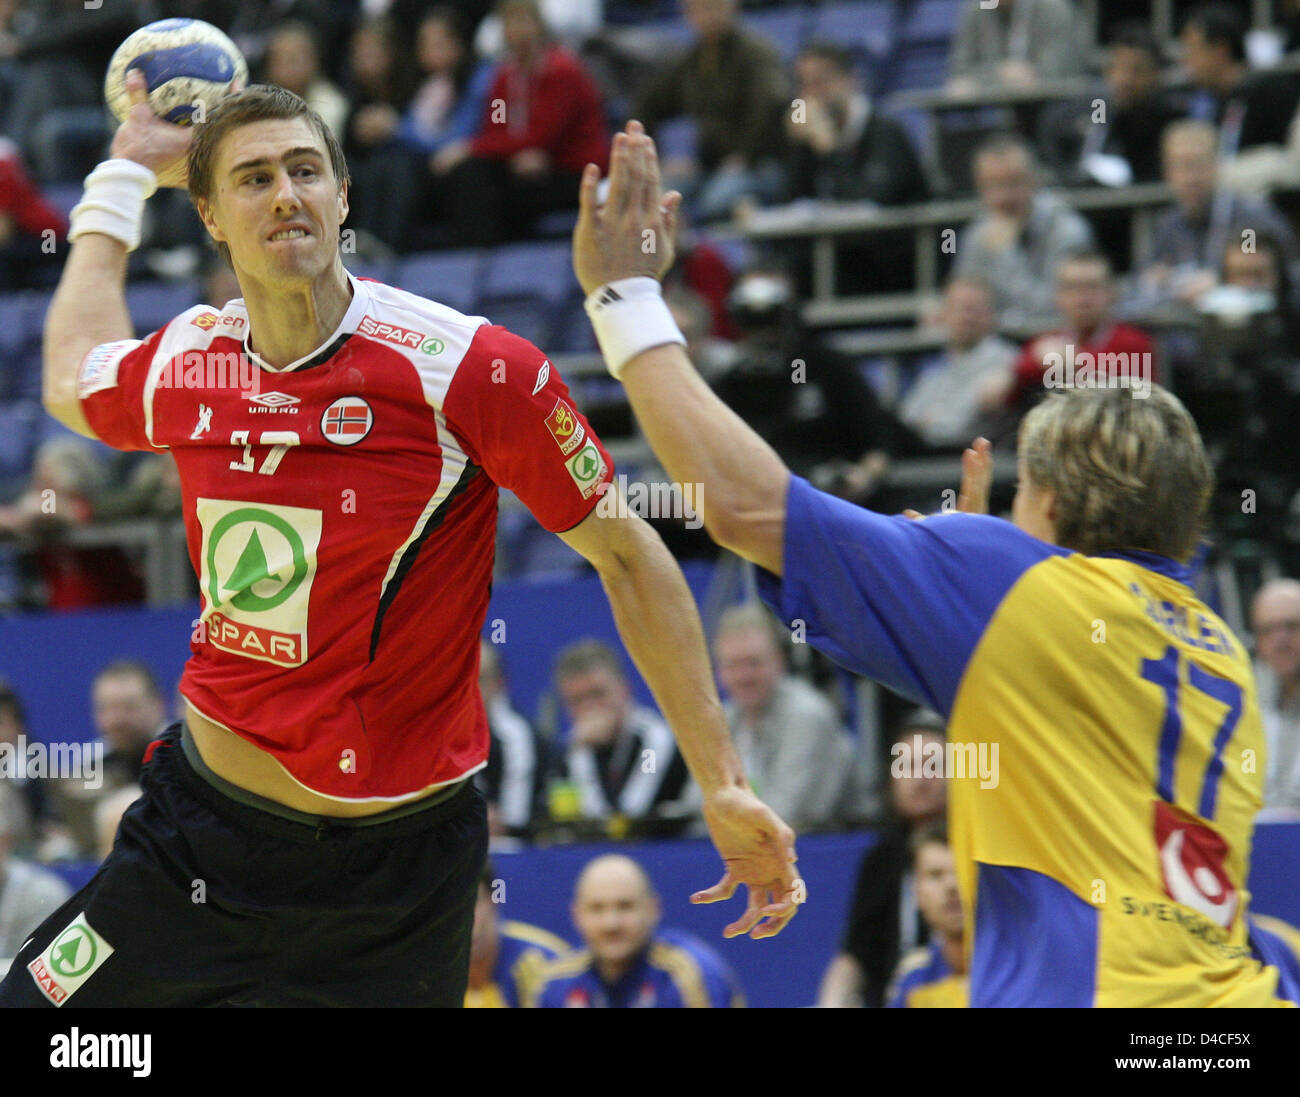 Andre Jorgensen (L) of Norway and Oscar Carlen of Sweden shown in action in the match for fifth place during the Handball European Championships at Hakonshall in Lillehammer, Norway, 26 January 2008. Photo: JENS WOLF Stock Photo